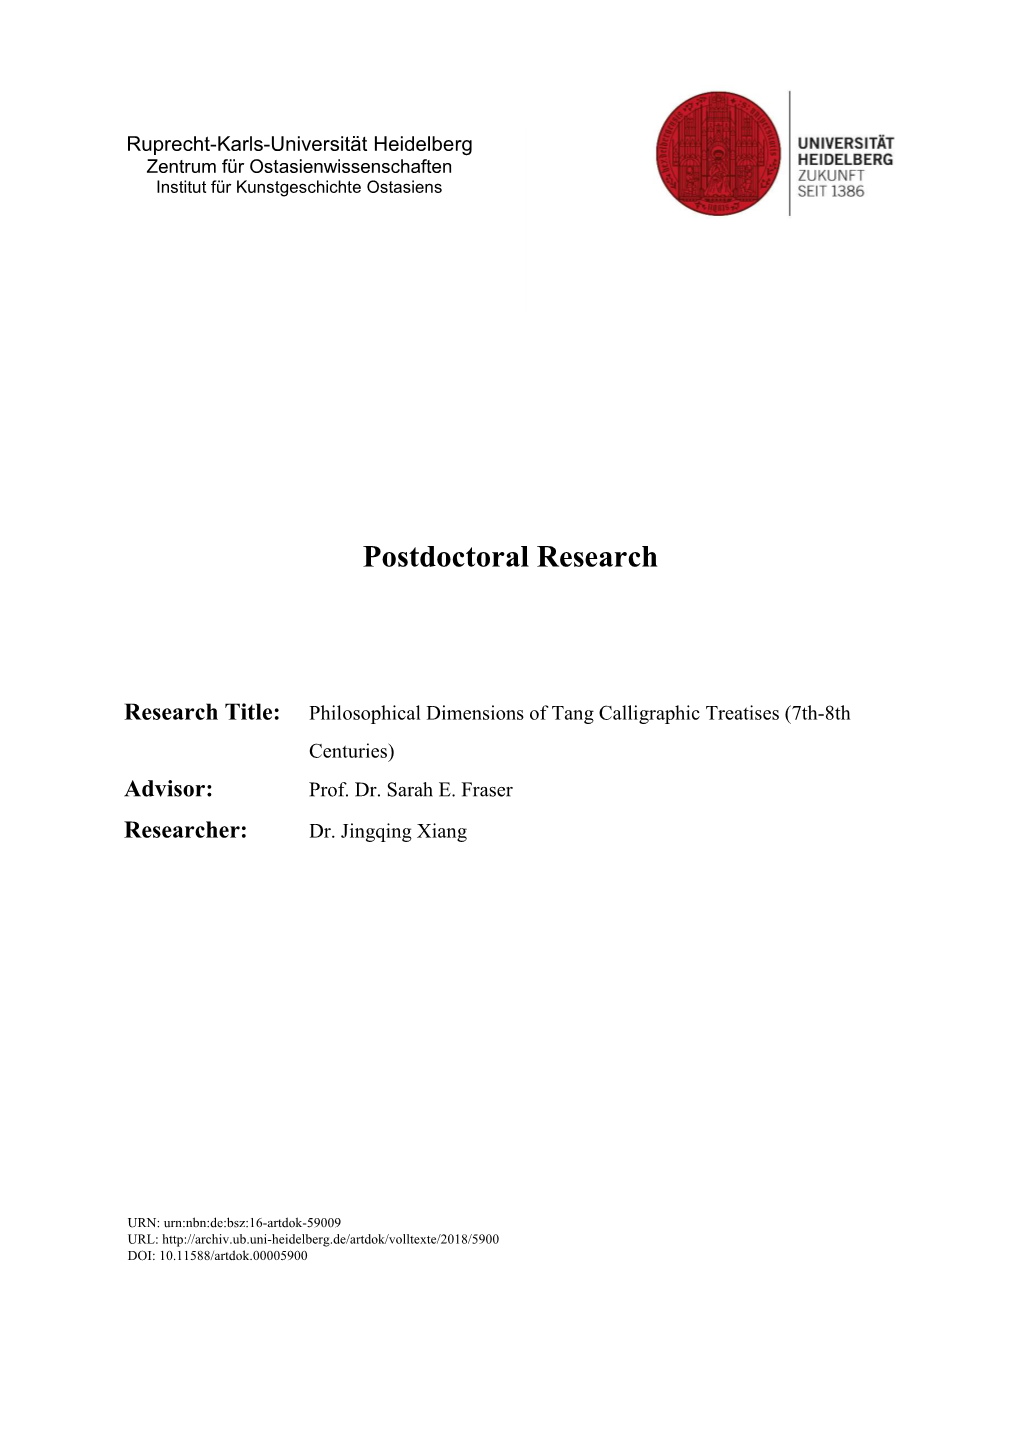 Postdoctoral Research